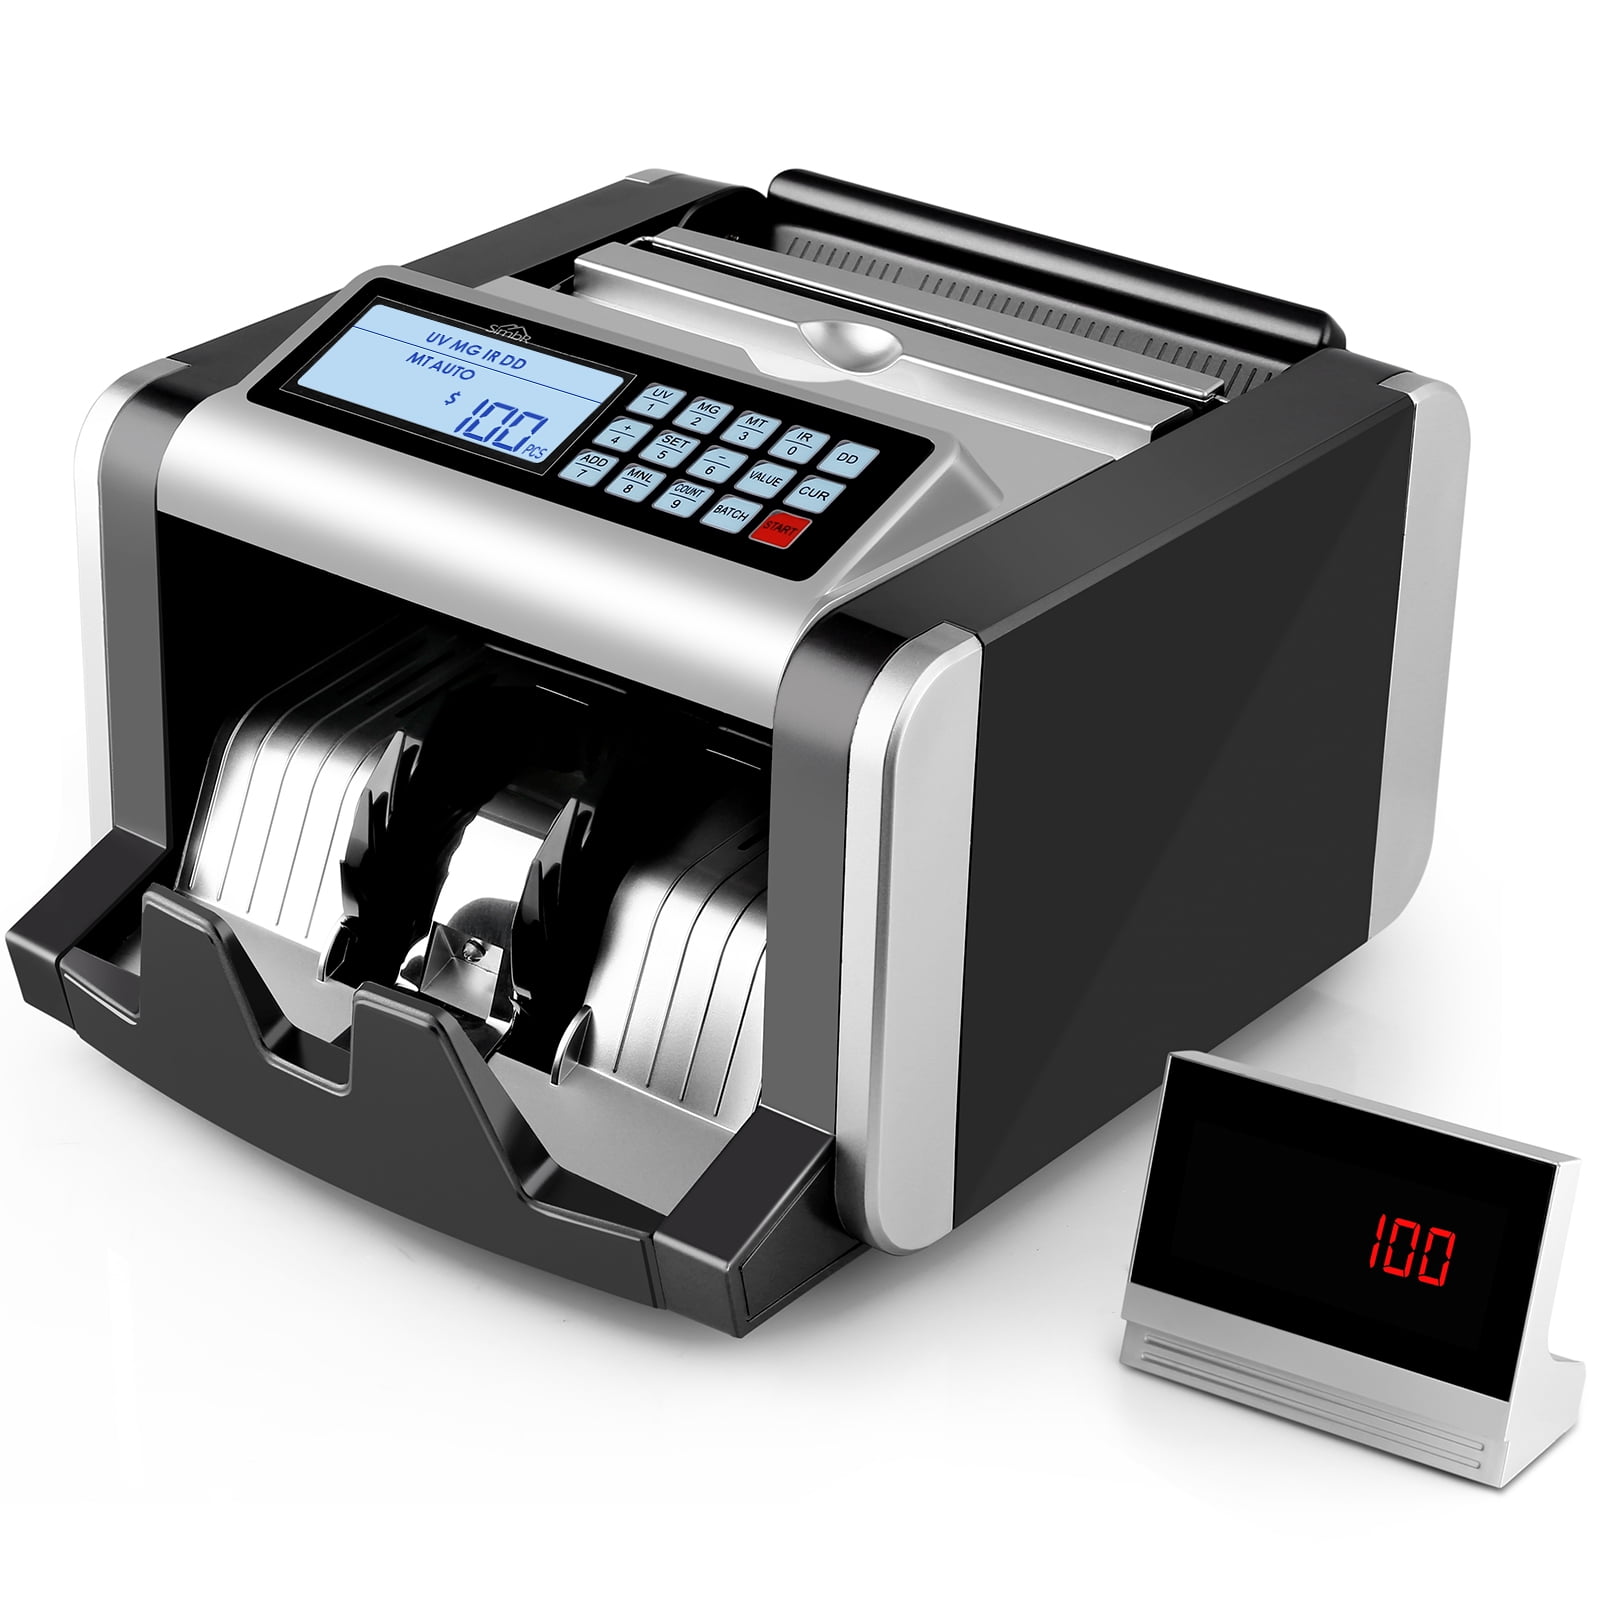 Details about   Money Counter Counterfeit Detection UV/IR/DD/MG/MT 3 Display Auto Count Fast 